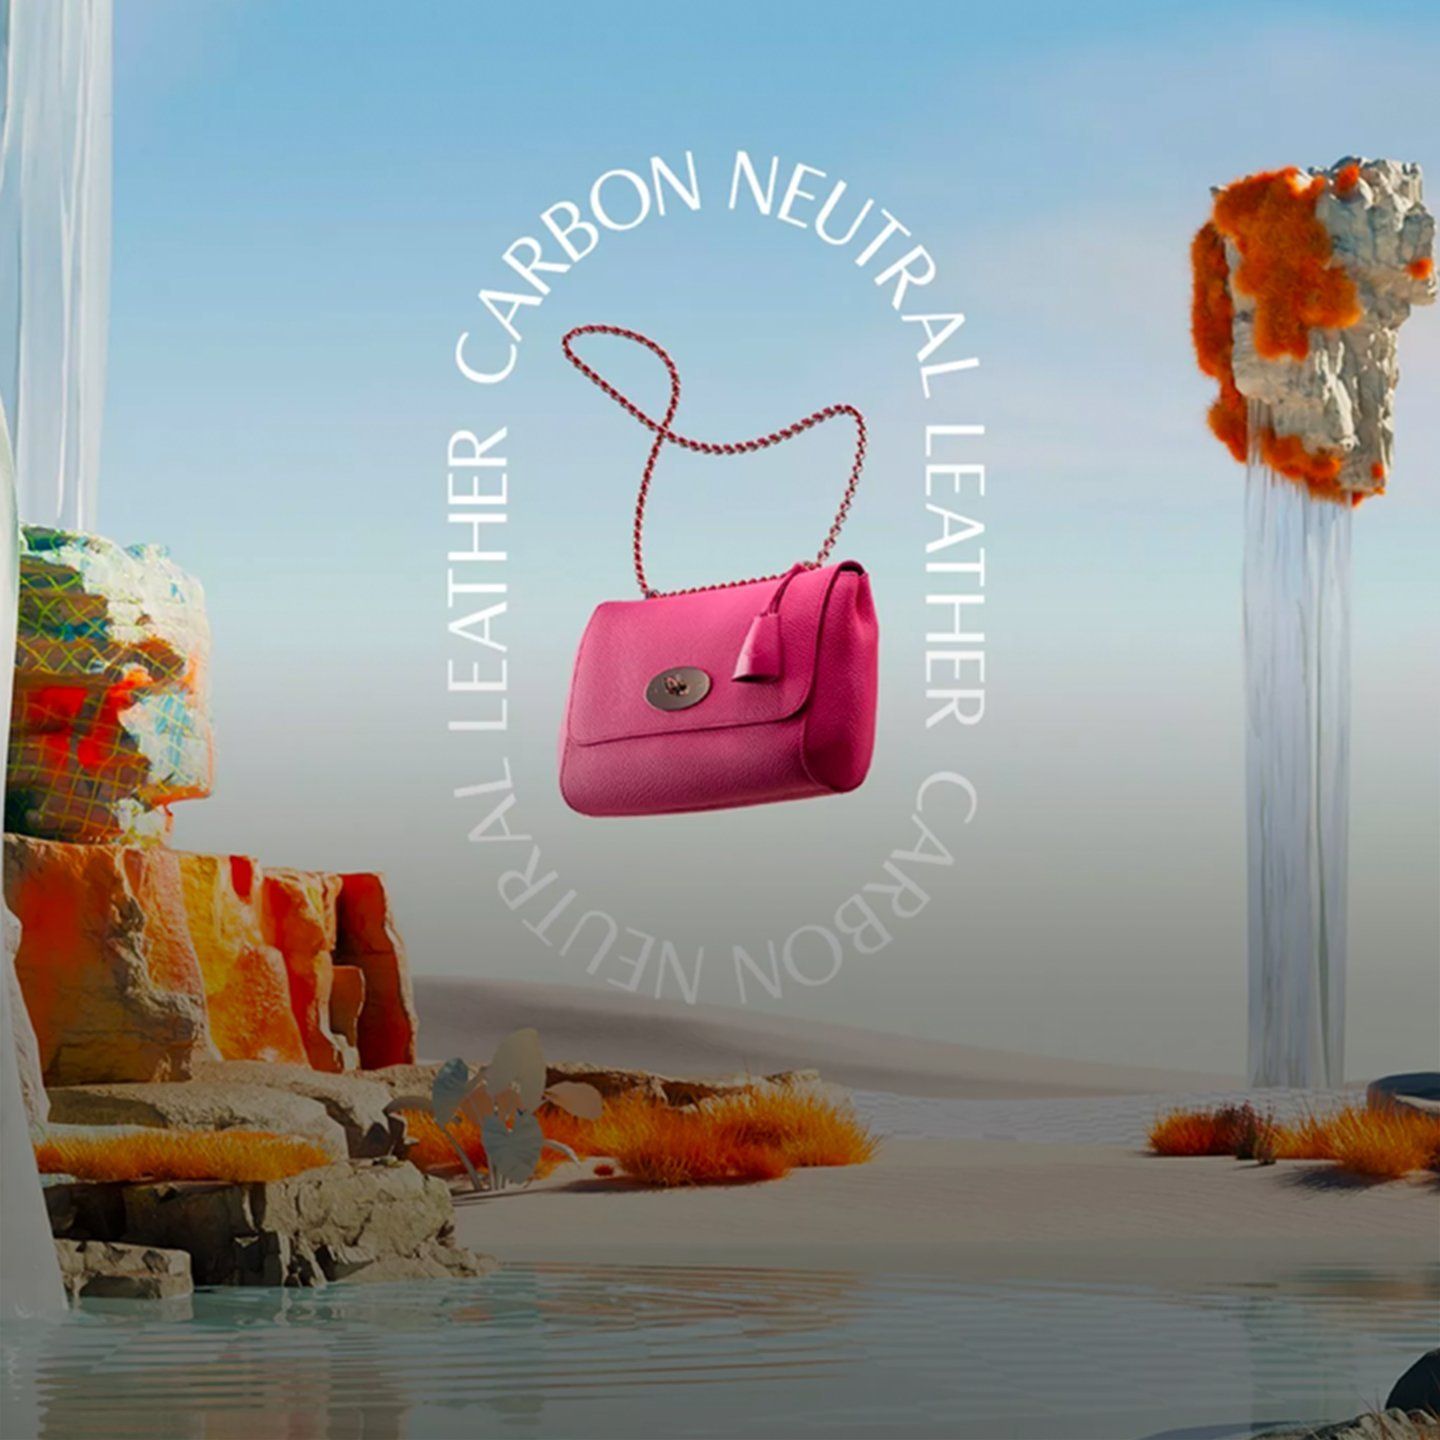 mulberry lily bag in mulberry pink with carbon neutral text graphic